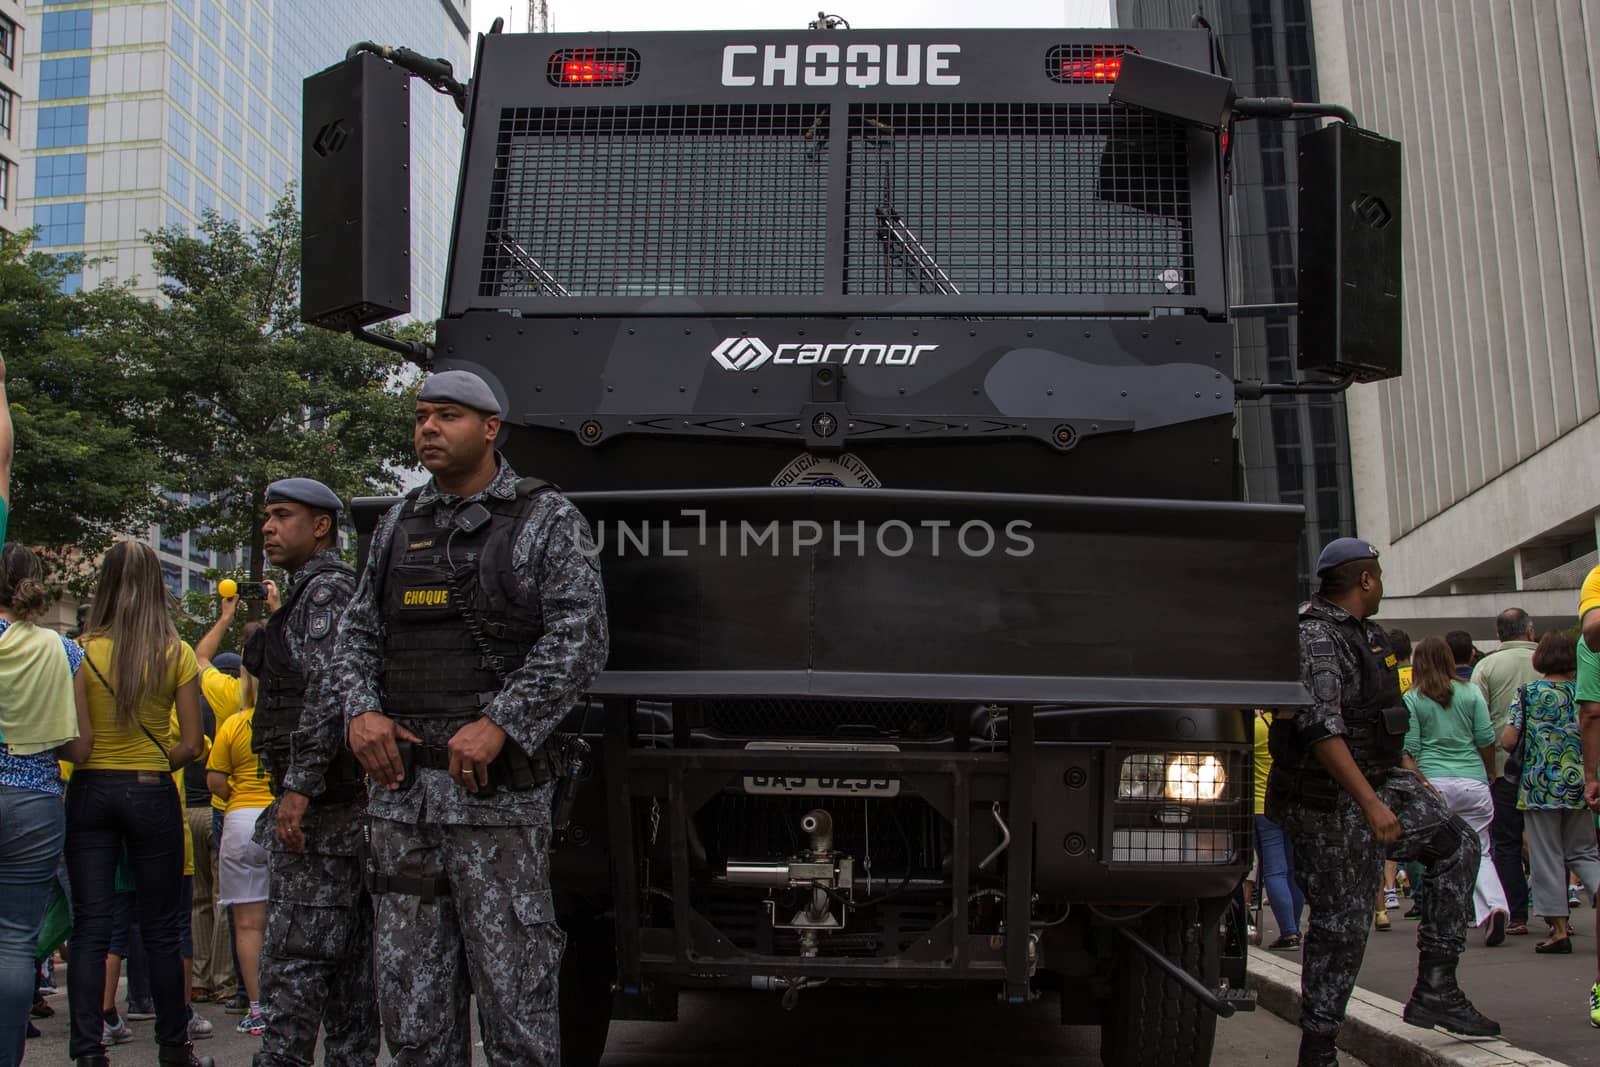 Sao Paulo Brazil March 13, 2016: A couple of unidentified police